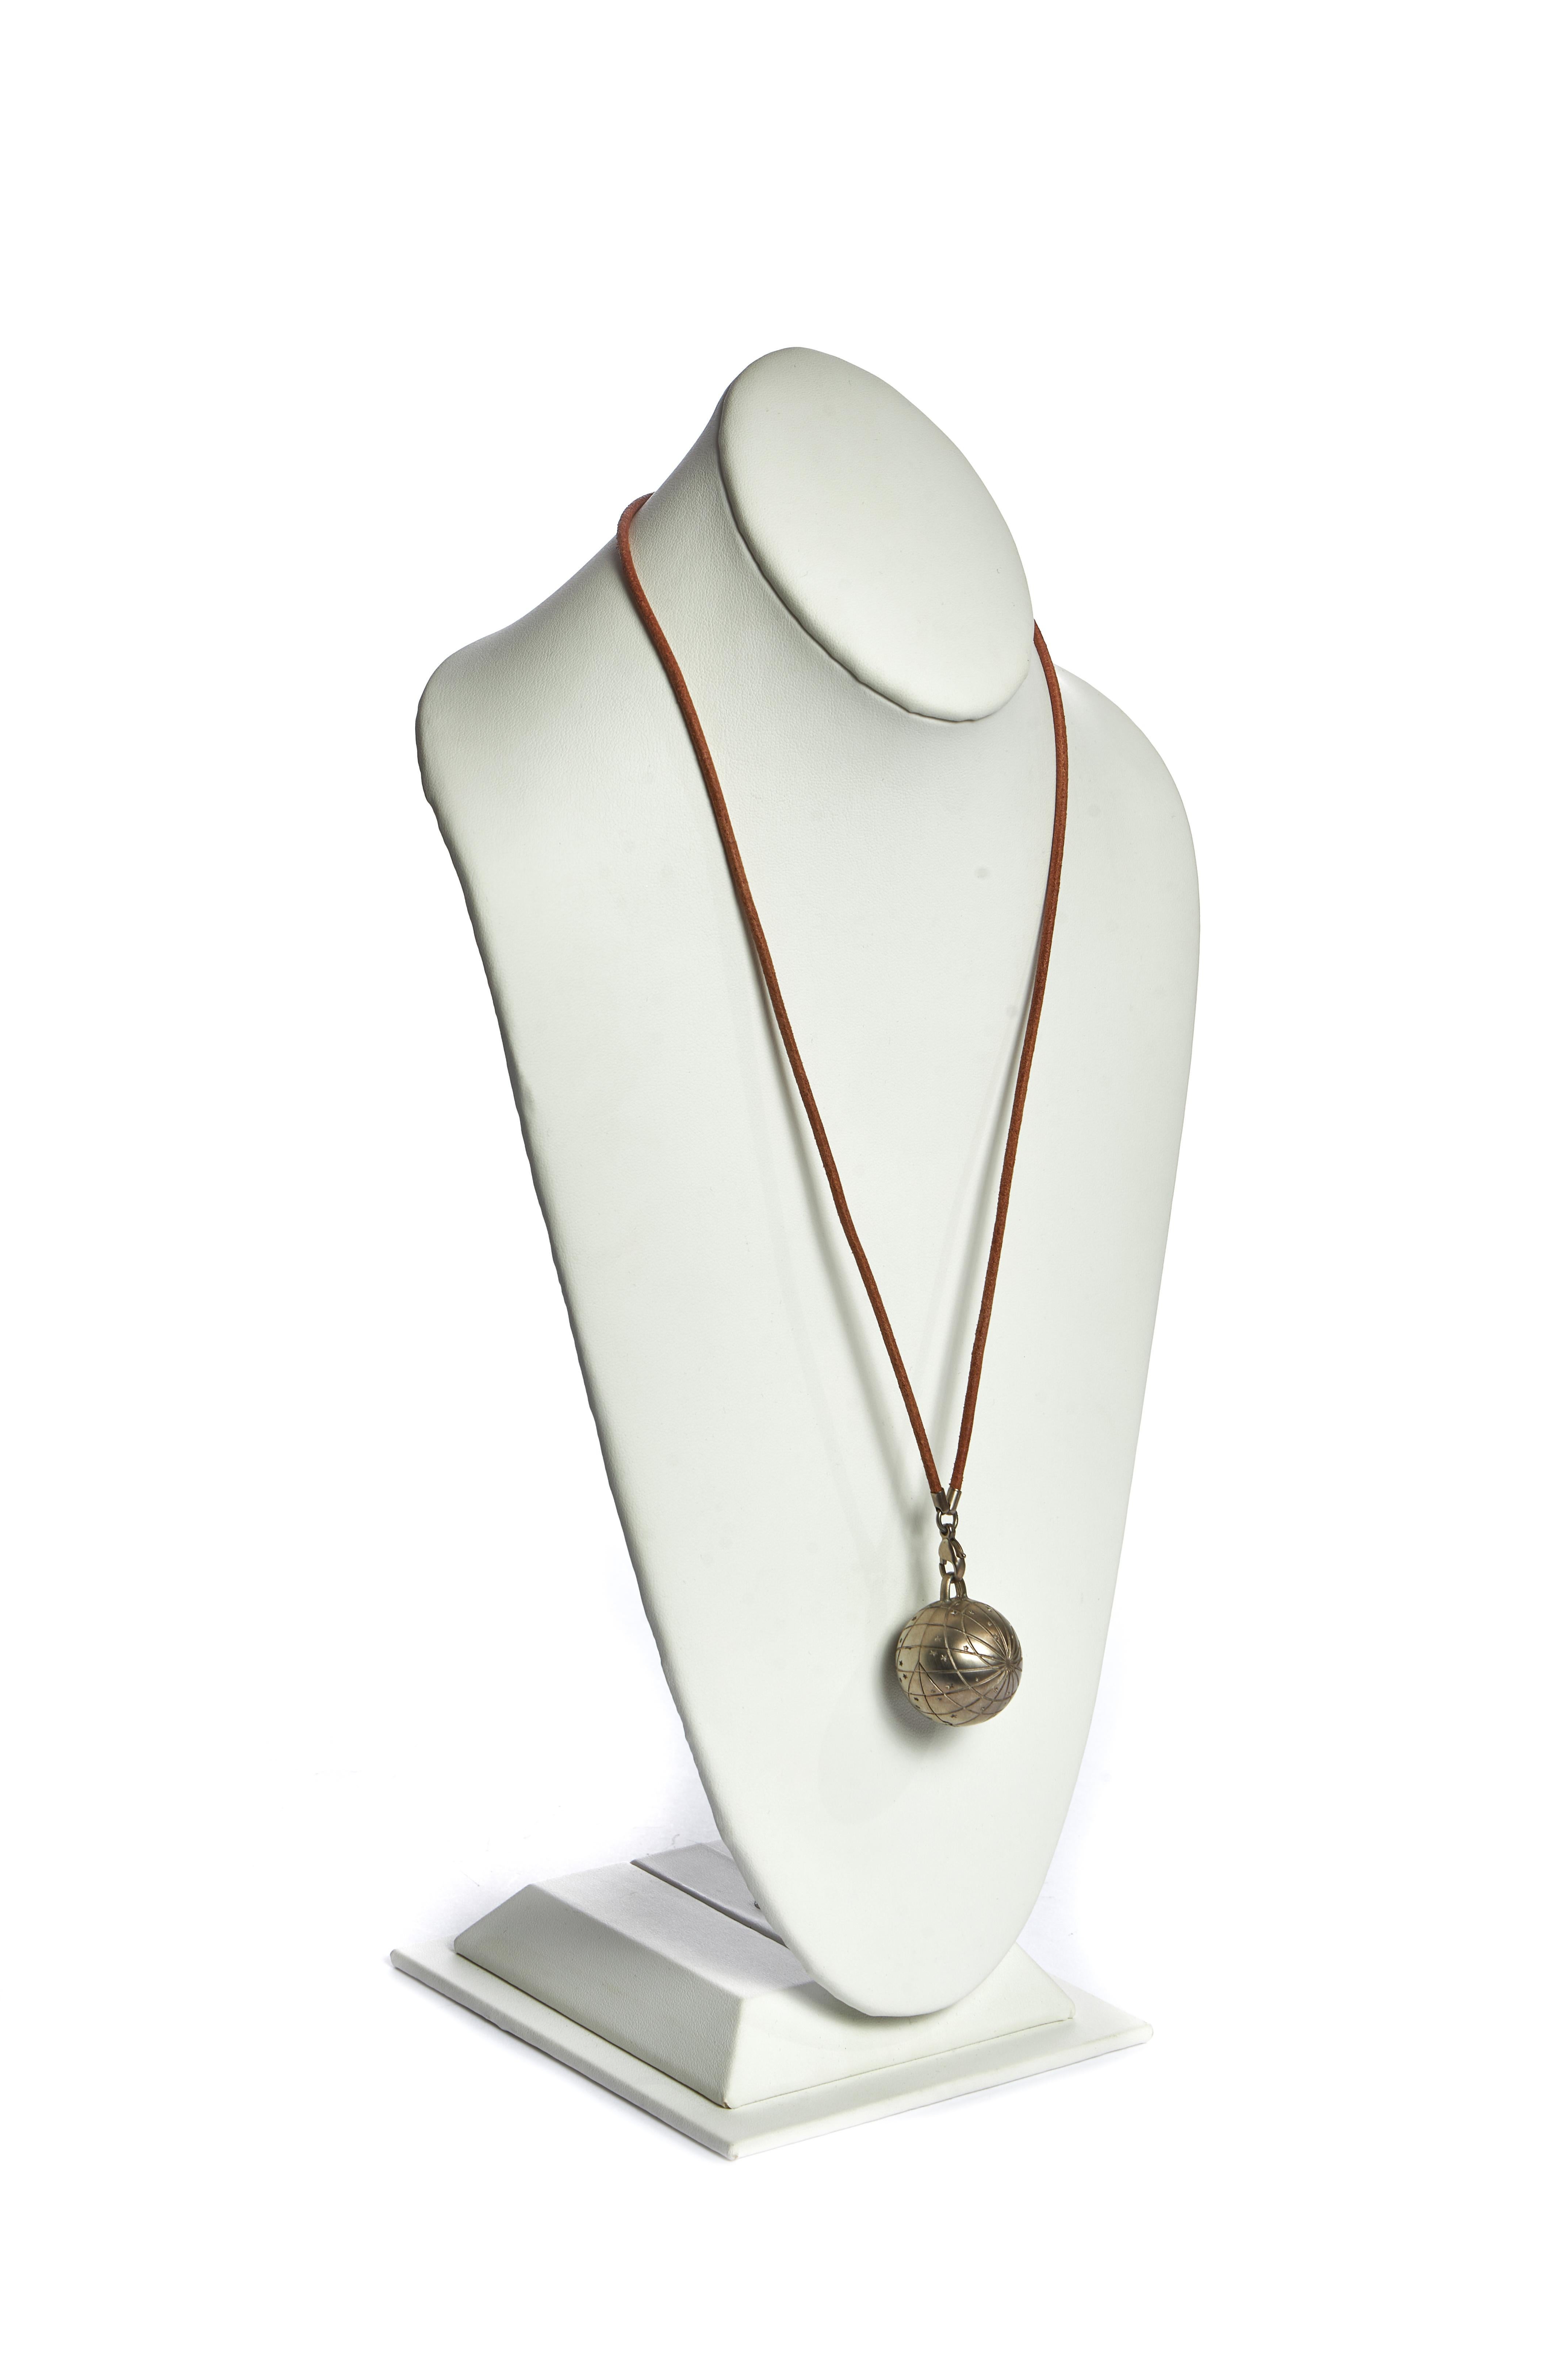 Hermes globe silver tone necklace with natural leather strap. Pendant opens and is hollow. Comes with velvet pouch.